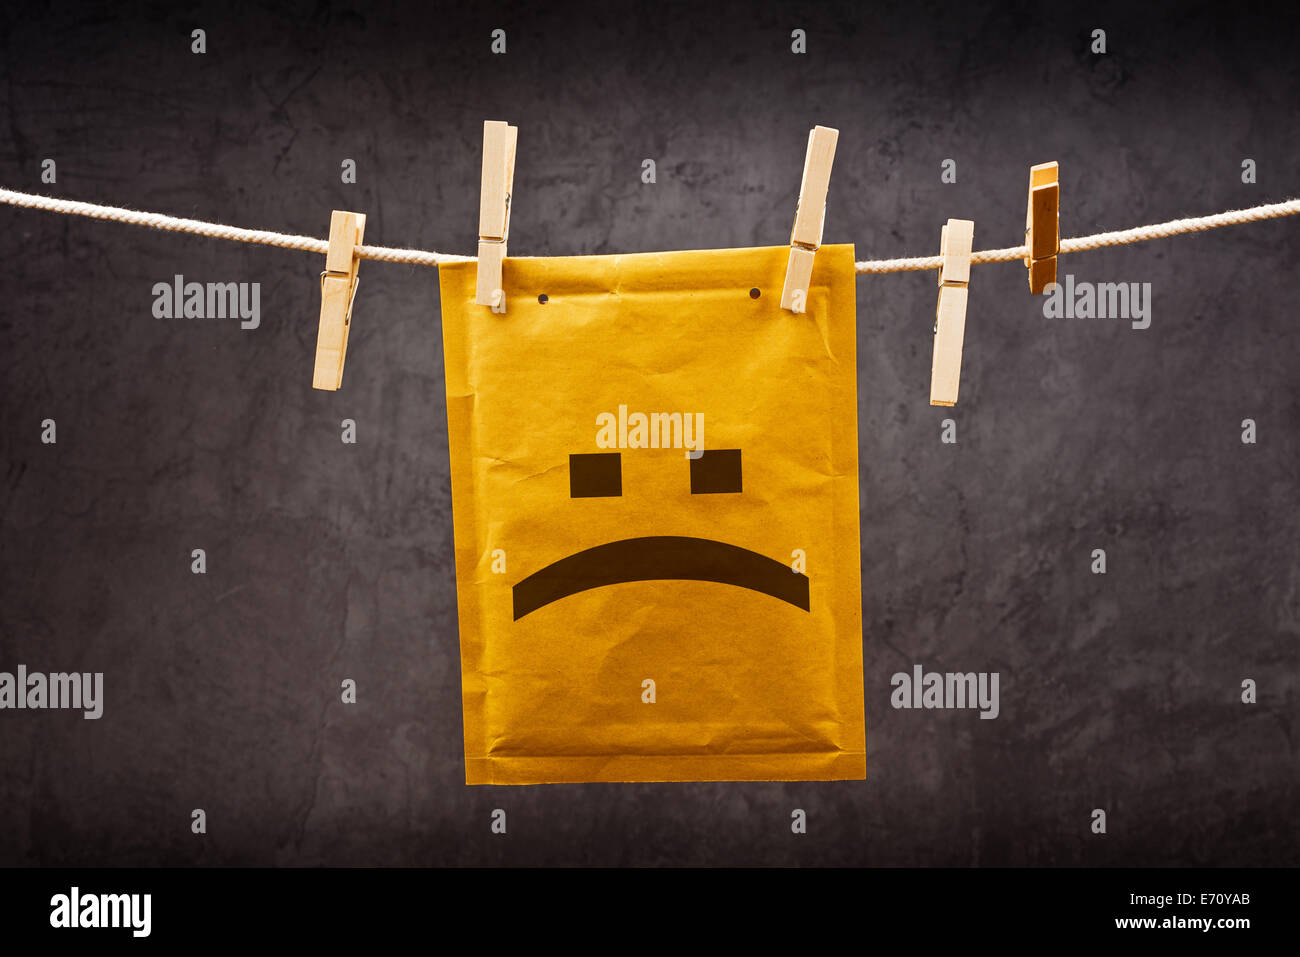 Sad face emoticon on Postal mail Envelope hanging on rope attached with clothes pins. Bad news concept. Stock Photo